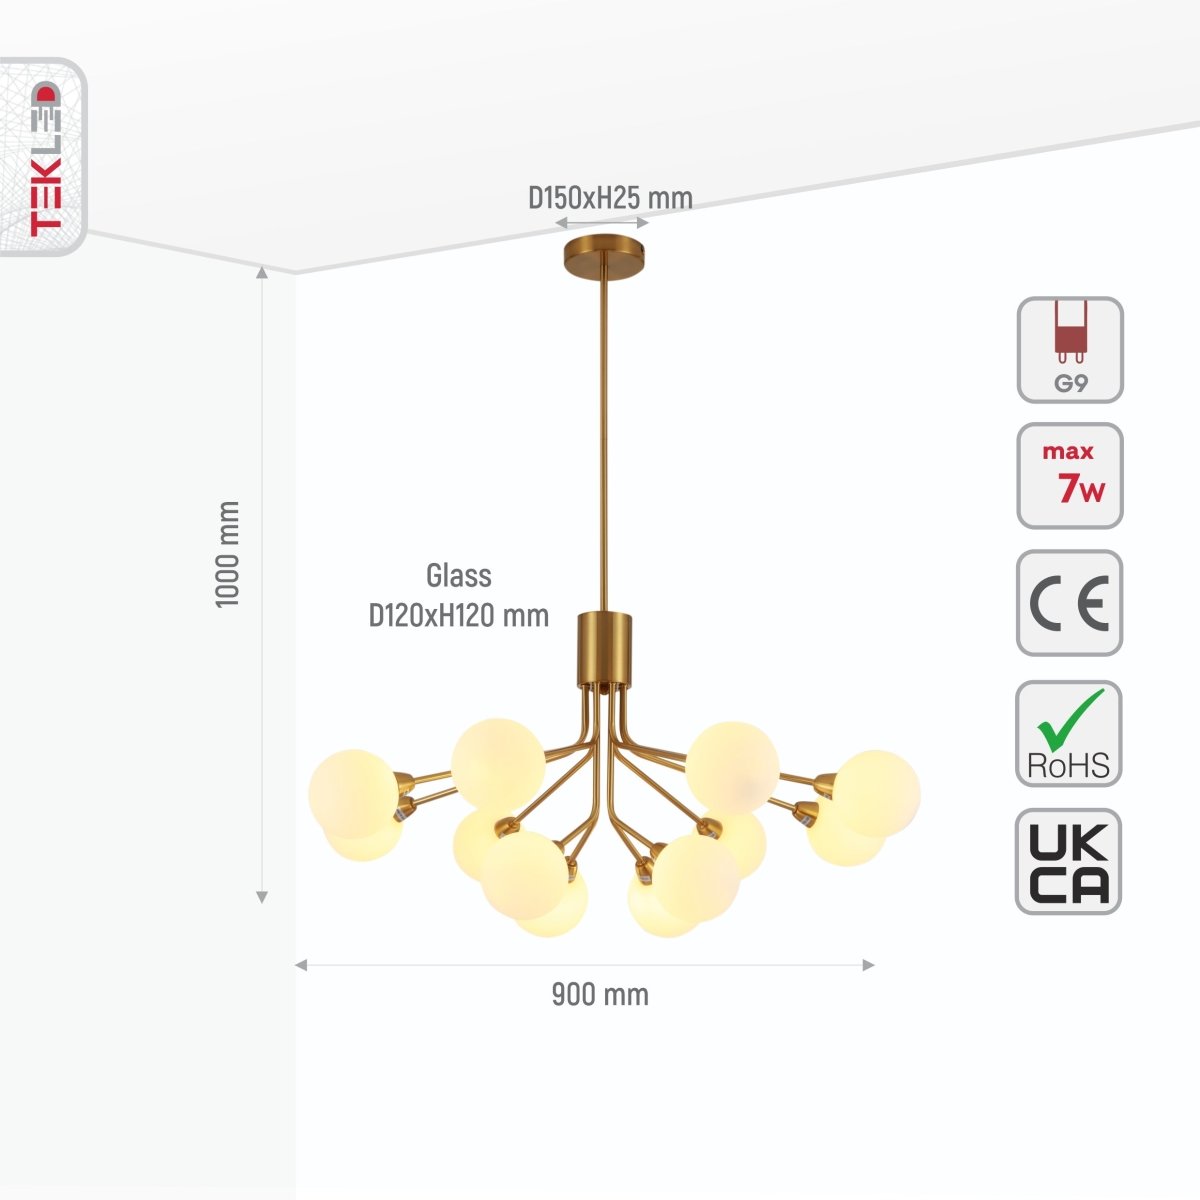 Size and specs of White Globe Glass Gold Arm Body Pendant Chandelier Light with 12xG9 Fitting | TEKLED 159-17554